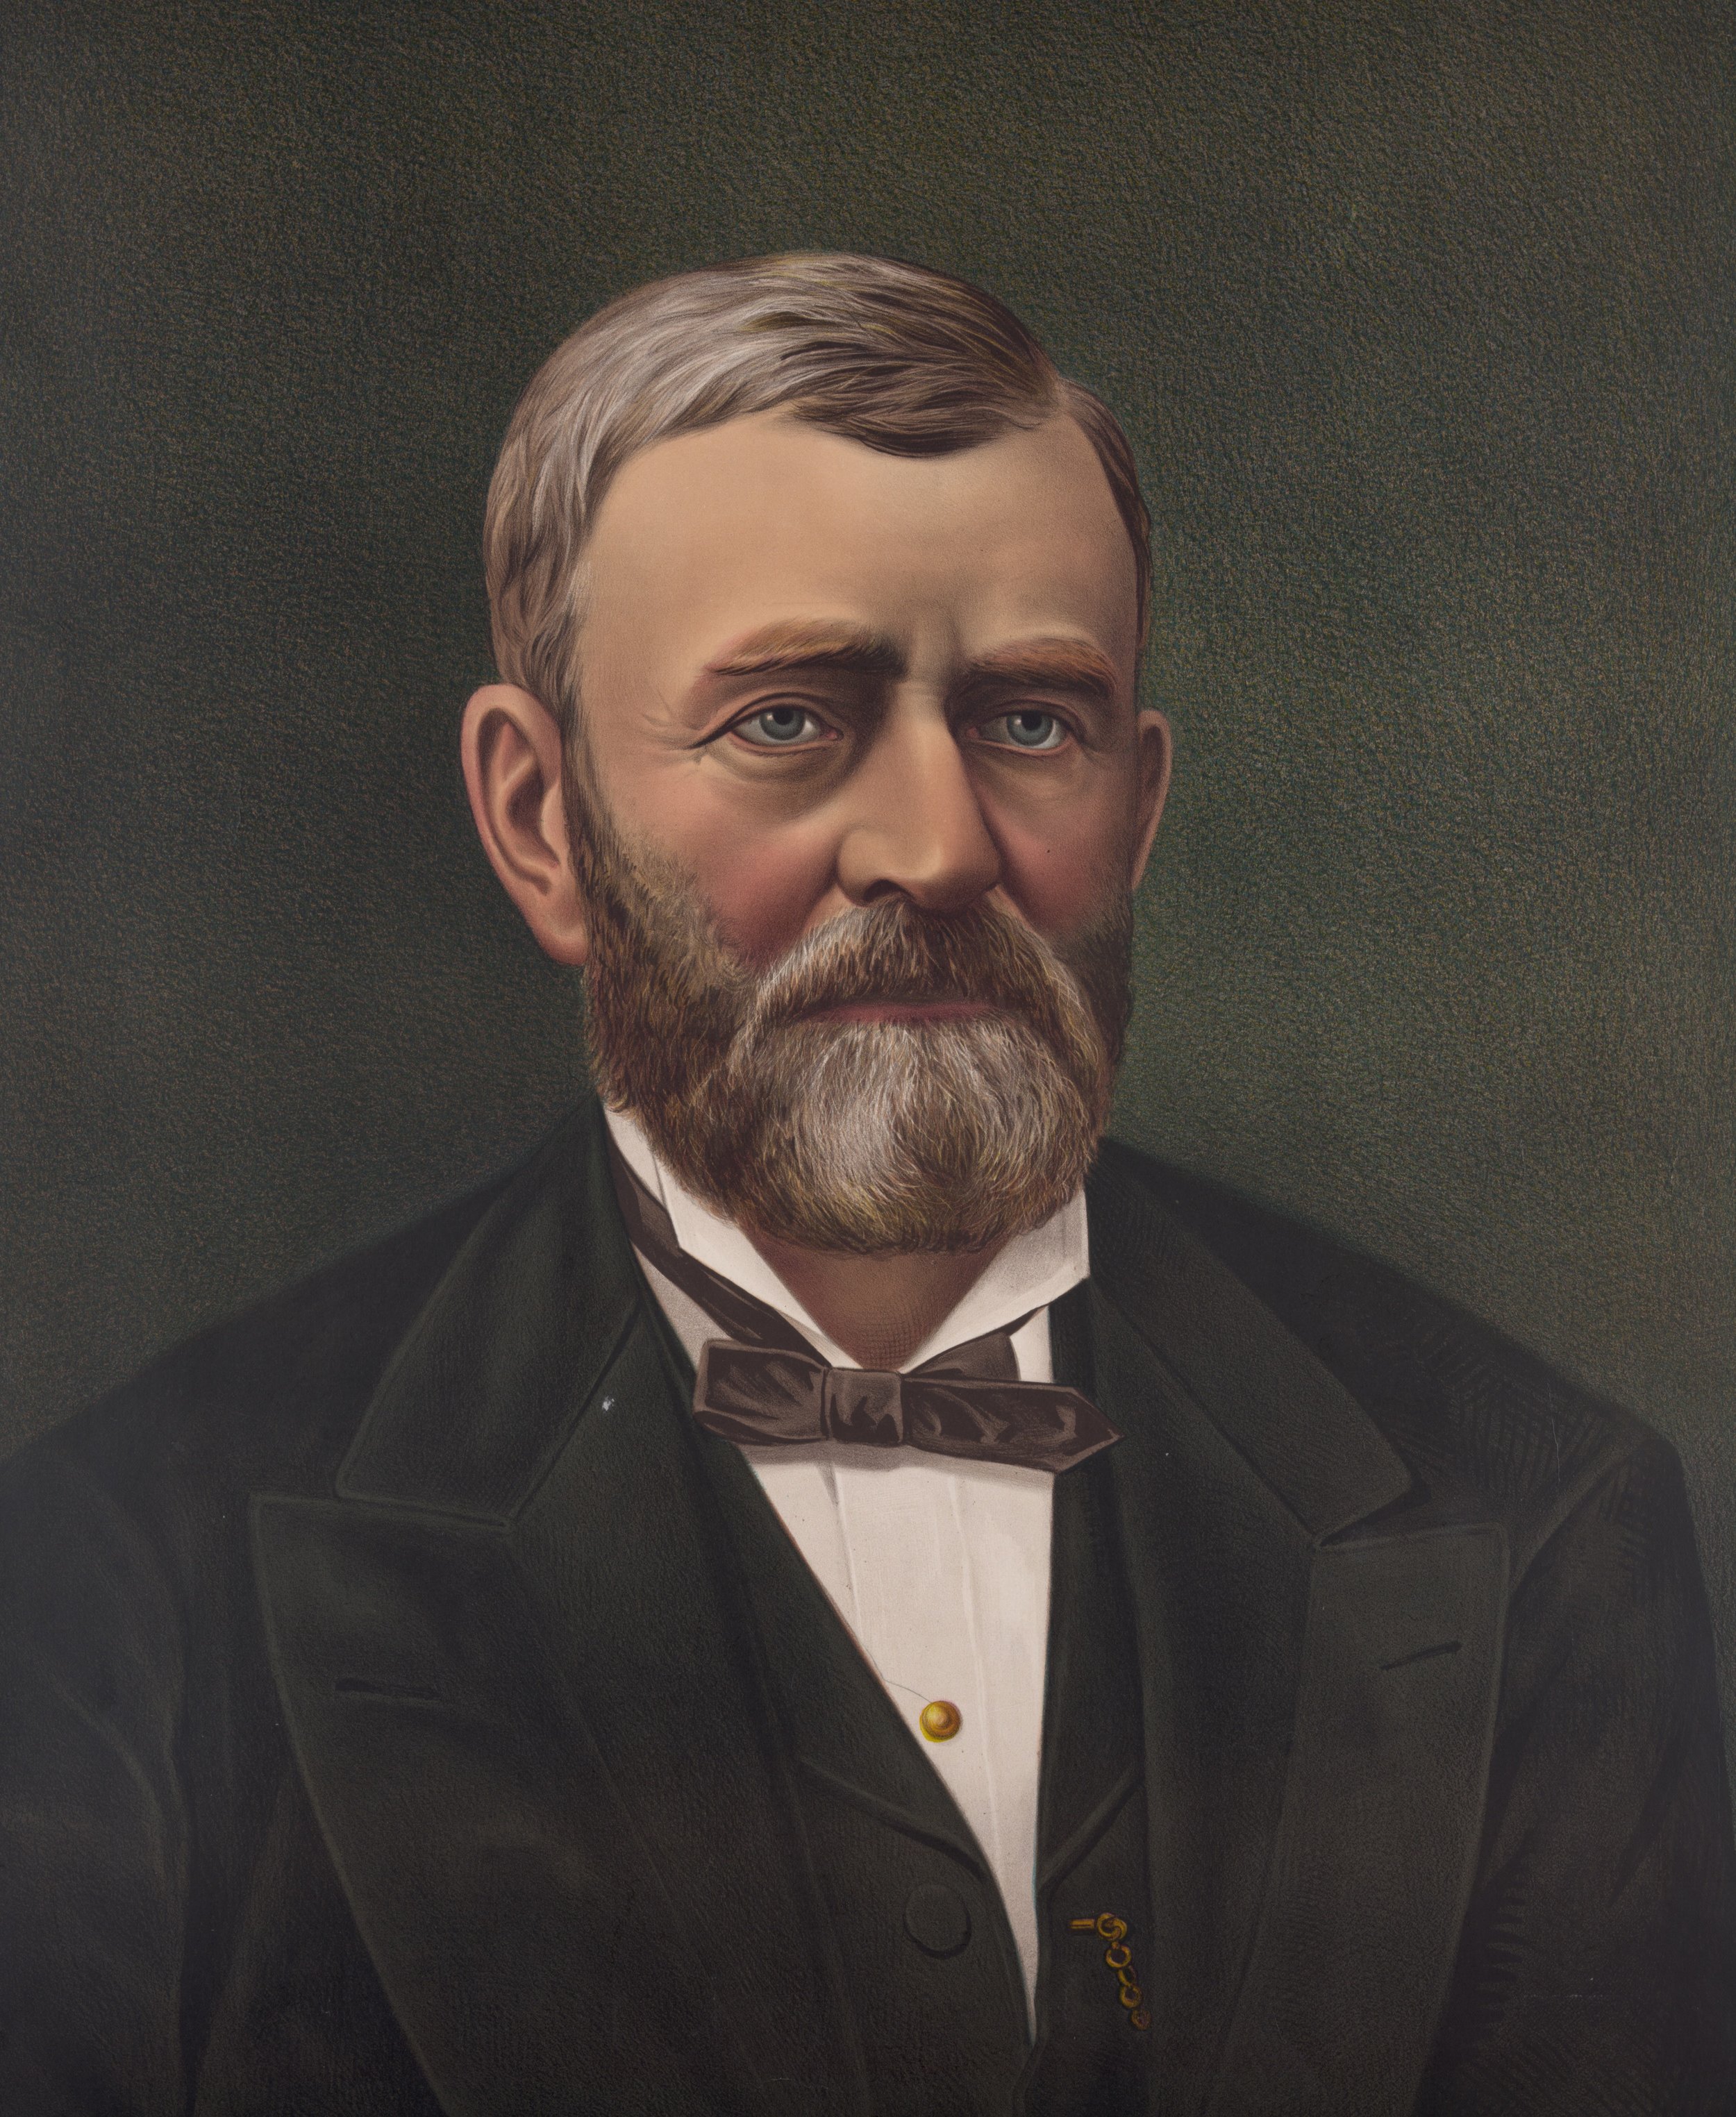  Ulysses S. Grant: As Union general, he won the Civil War; as president, he tried - and failed - to make Reconstruction succeed. 